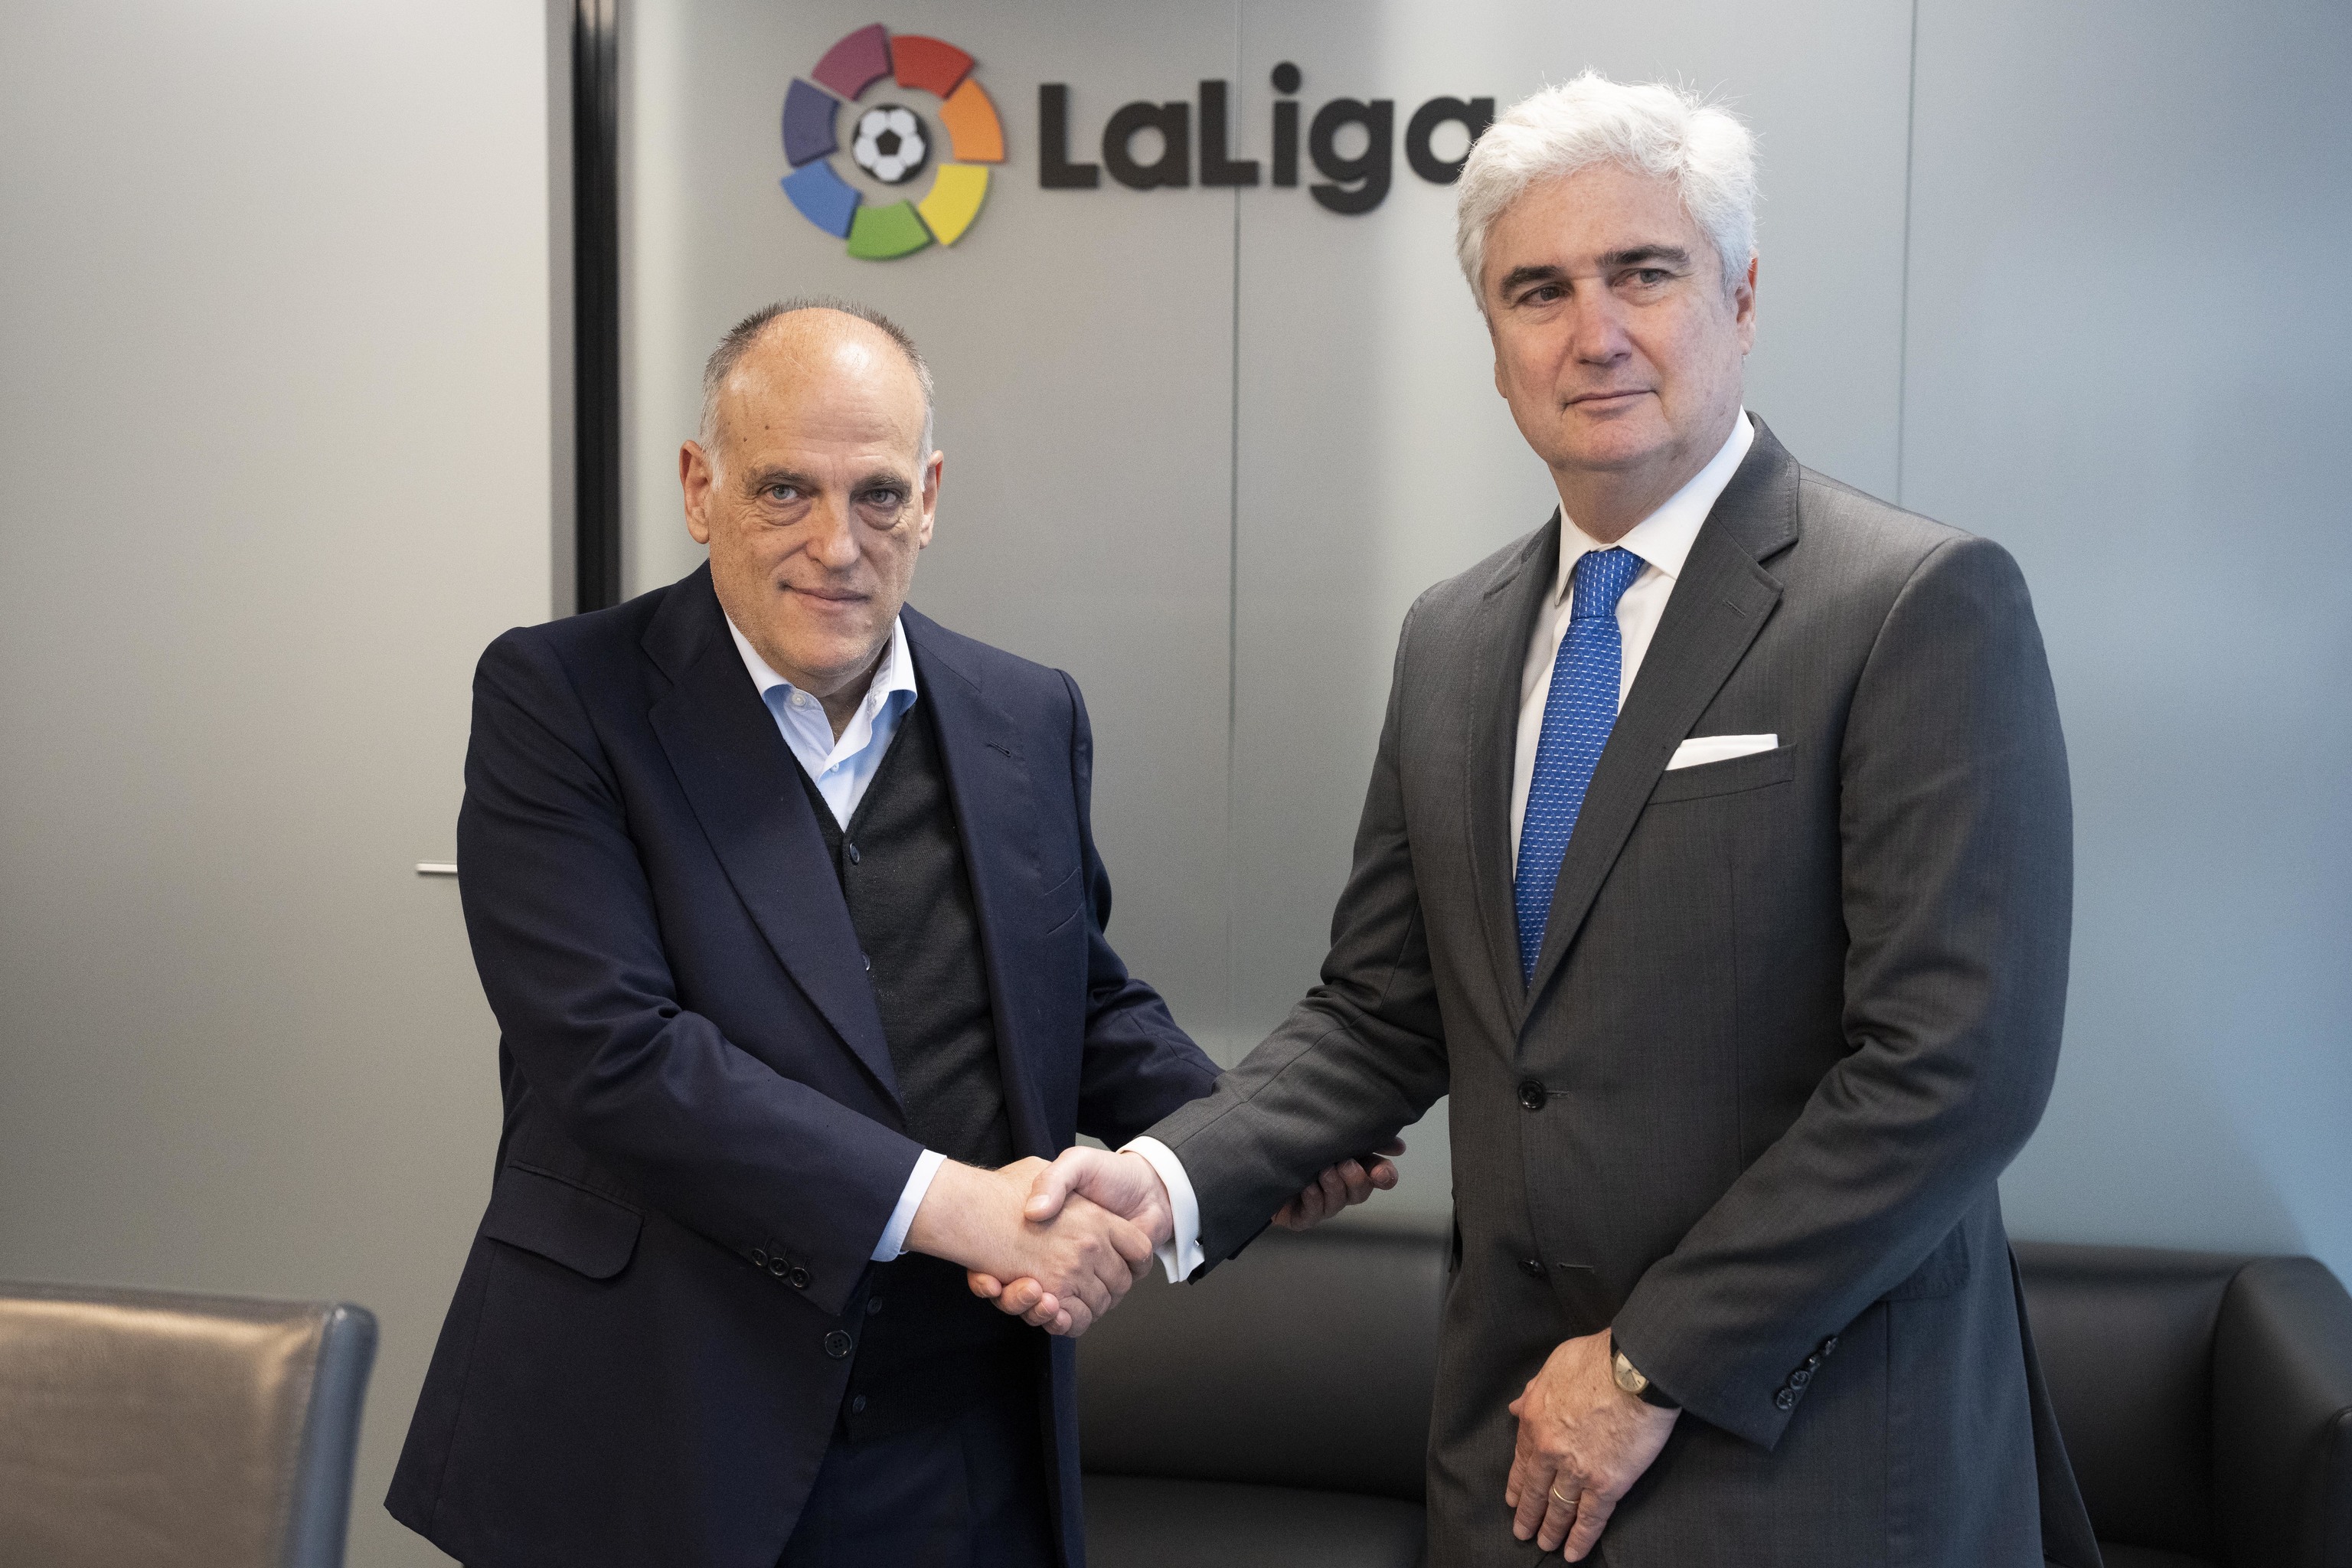 The president of LaLiga, Javier Tebas (left) and the Brazilian ambassador to Spain, Orlando Leite, during their meeting this Friday at the LaLiga headquarters.